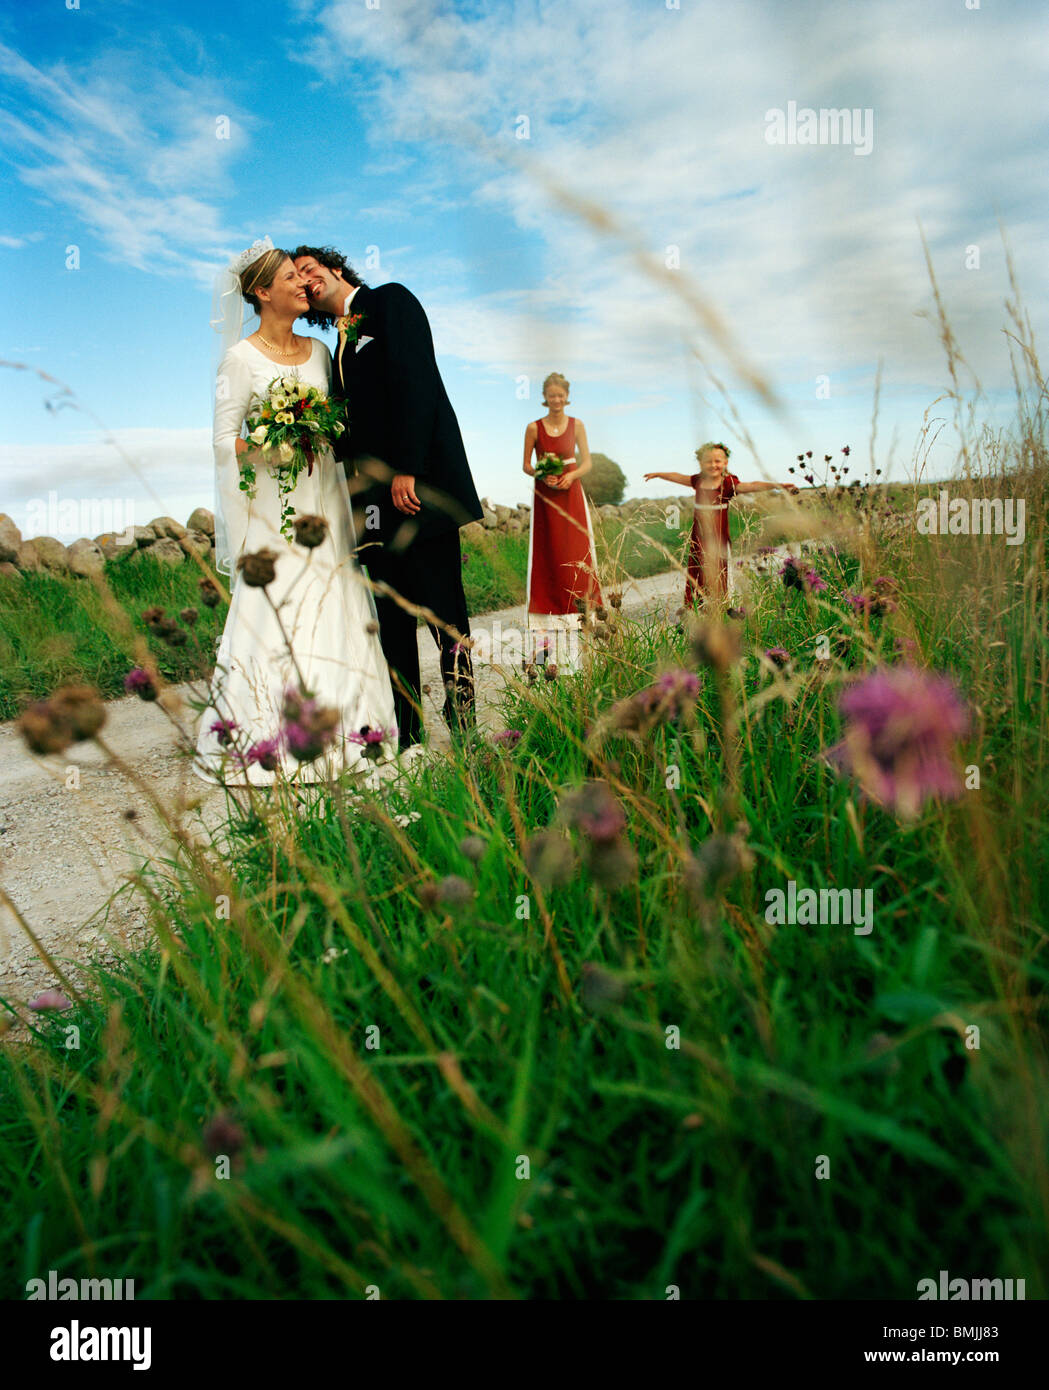 Scandinavia, Sweden, Oland, Bride and groom kissing with bridesmaid and flower girl in background Stock Photo